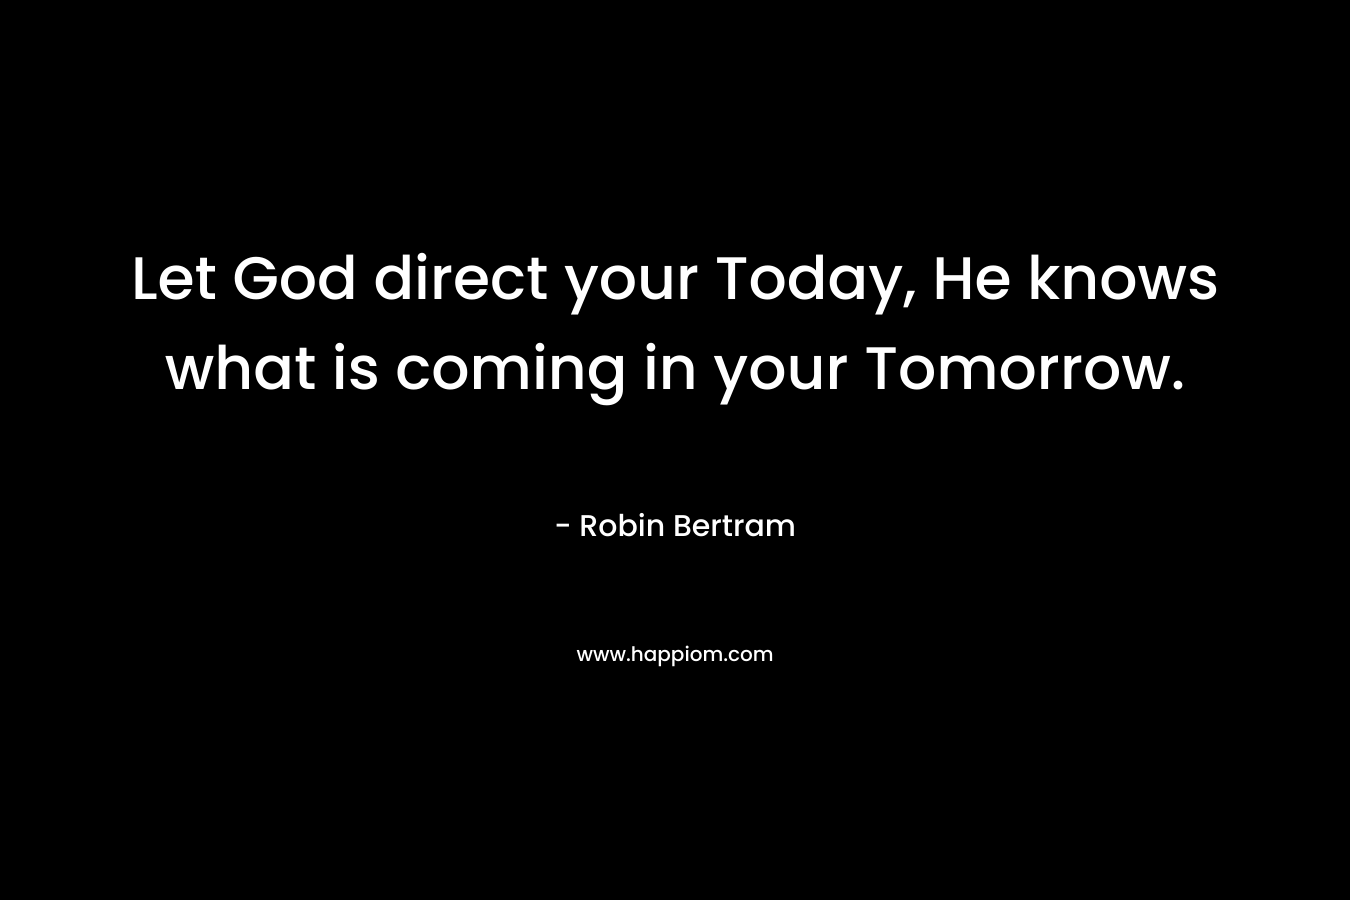 Let God direct your Today, He knows what is coming in your Tomorrow. – Robin Bertram